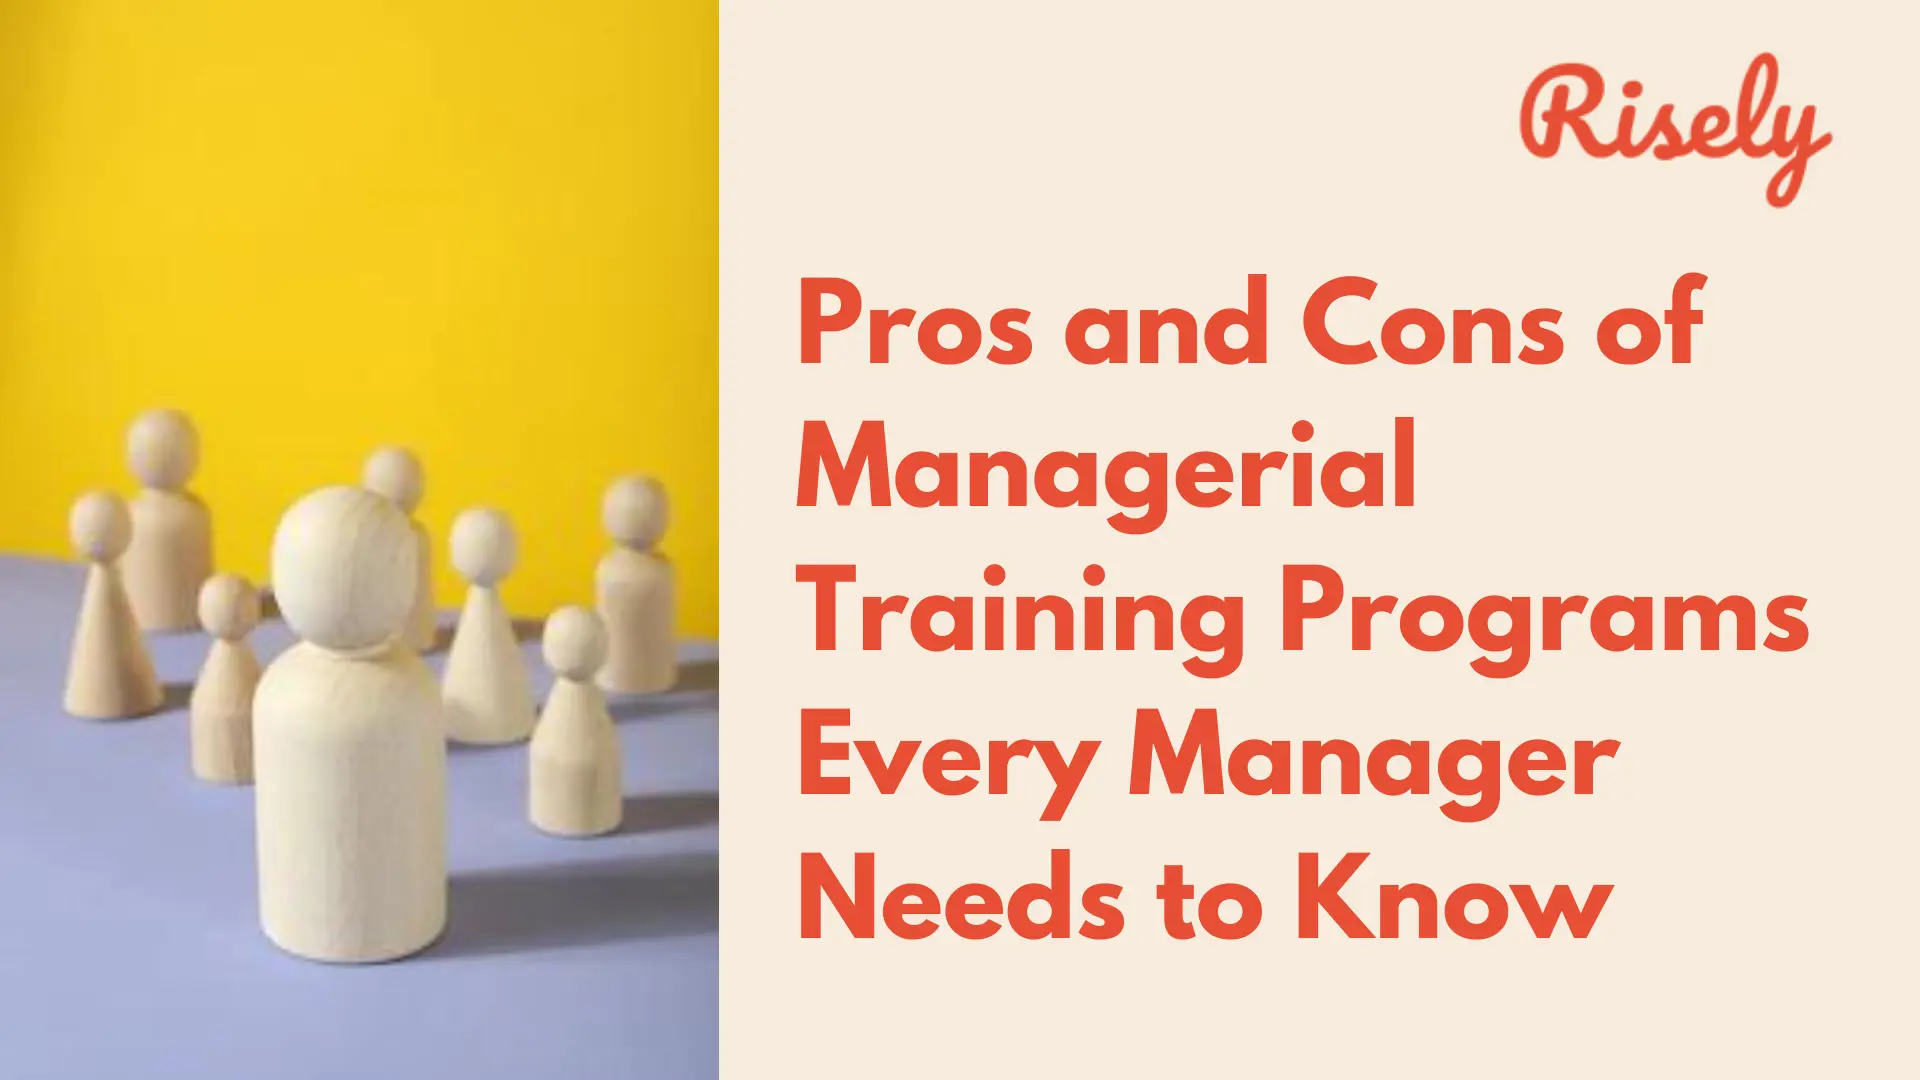 Managerial Training Programs